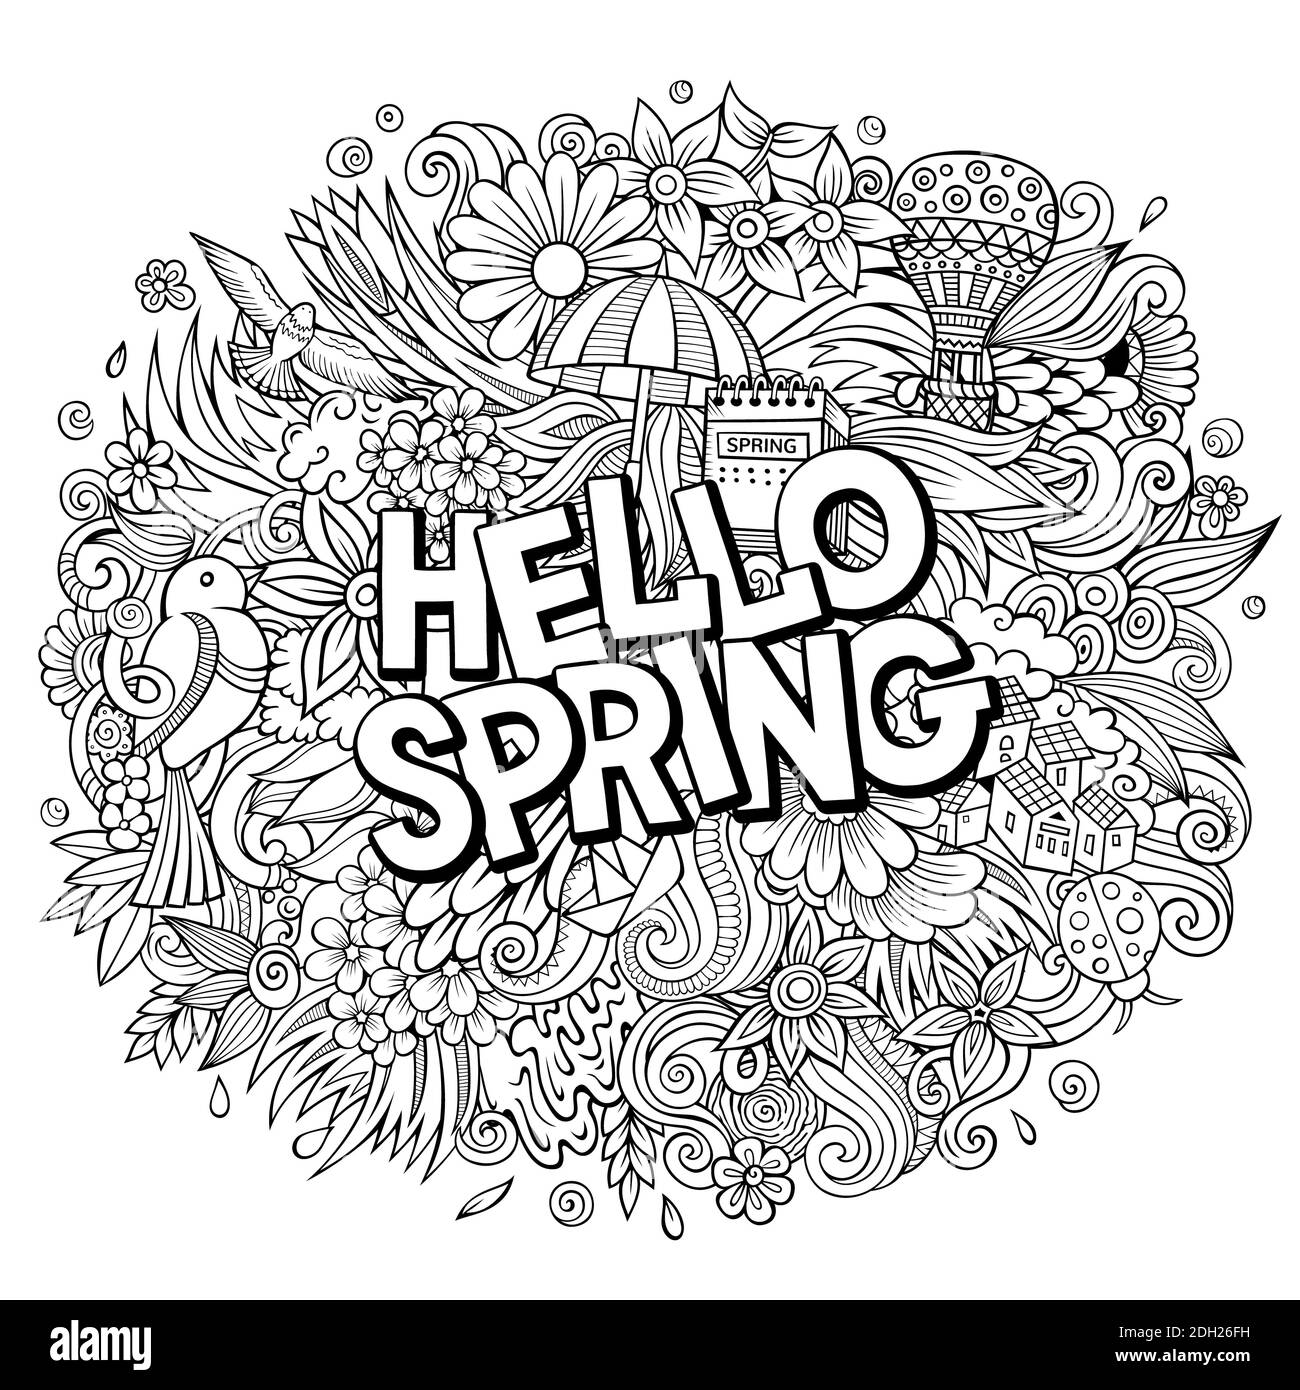 Hello Spring hand drawn cartoon doodles illustration. Funny seasonal design. Creative art raster background. Handwritten text with nature elements and Stock Photo